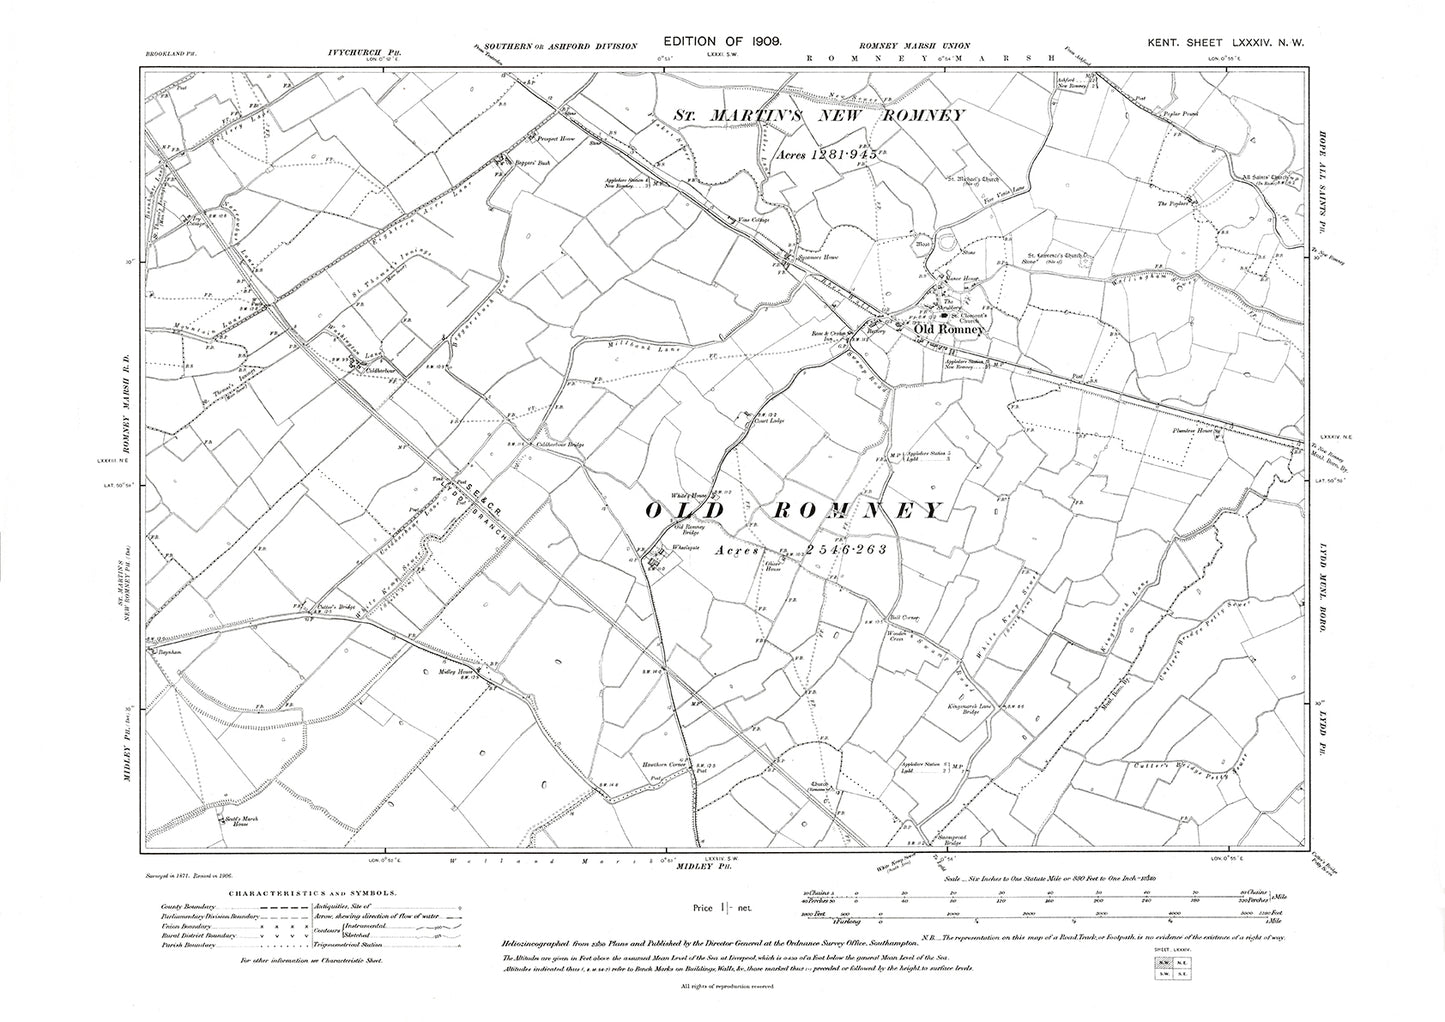 Old Romney, old map Kent 1909: 84NW